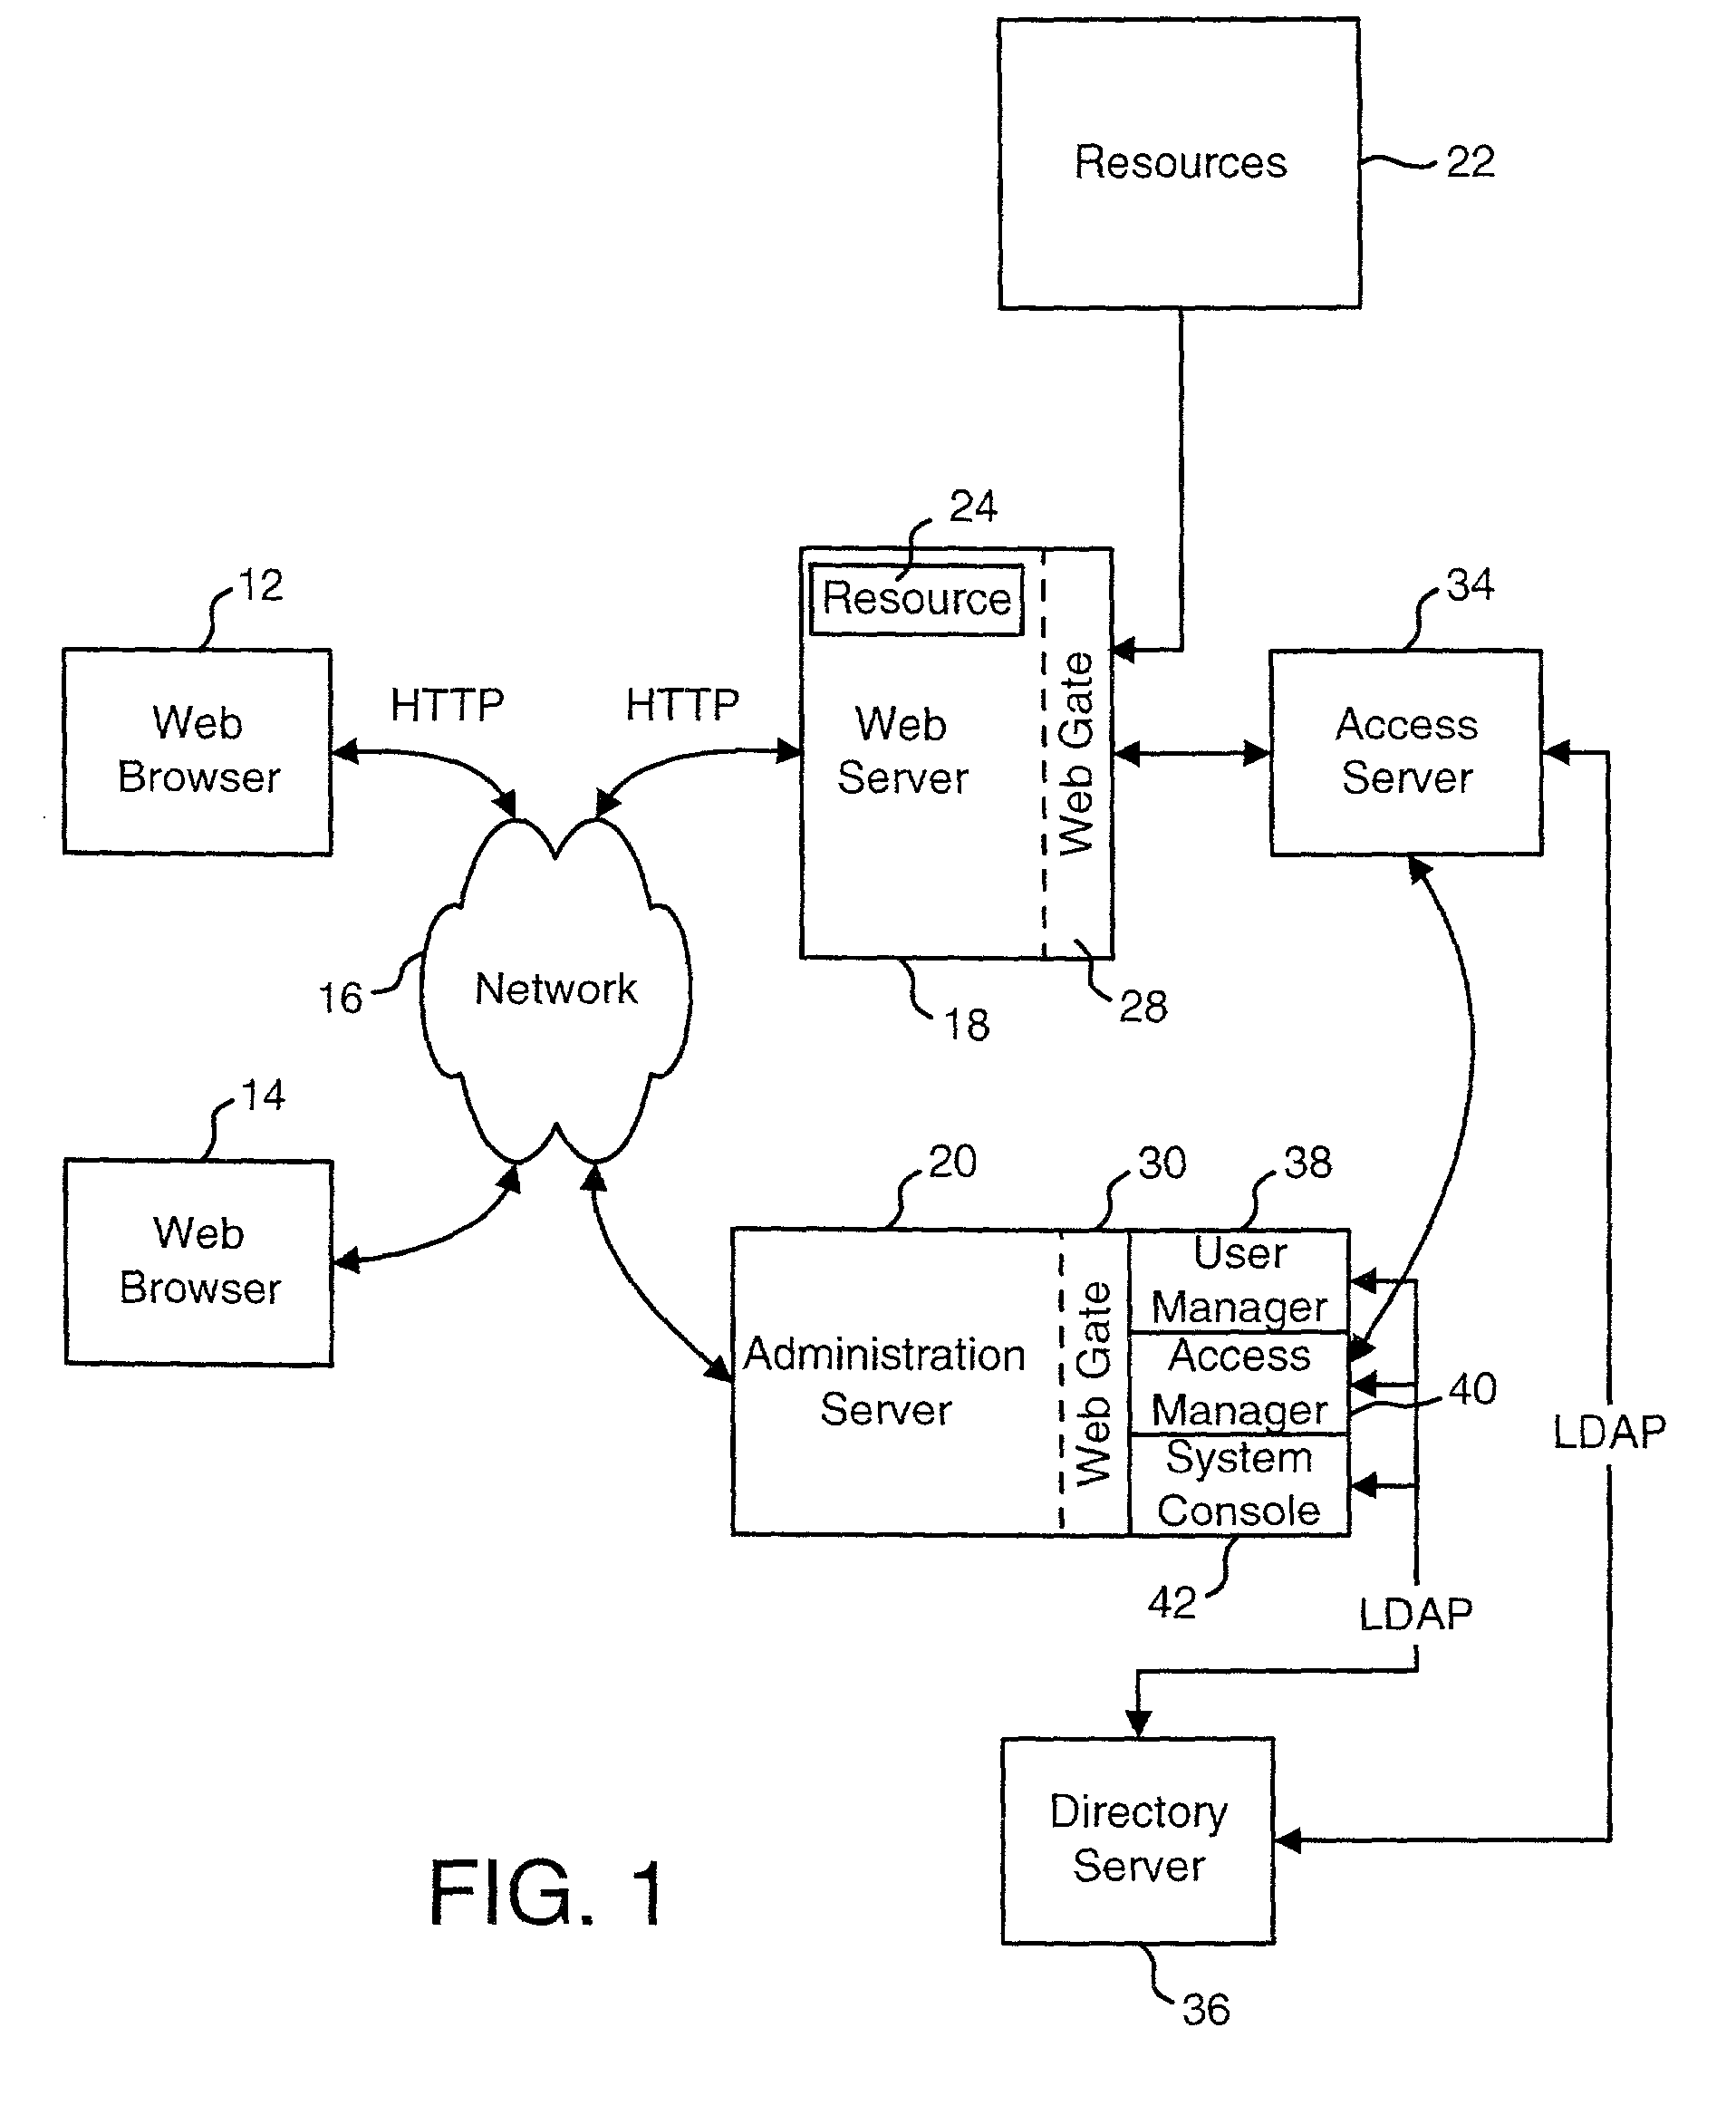 Providing data to applications from an access system